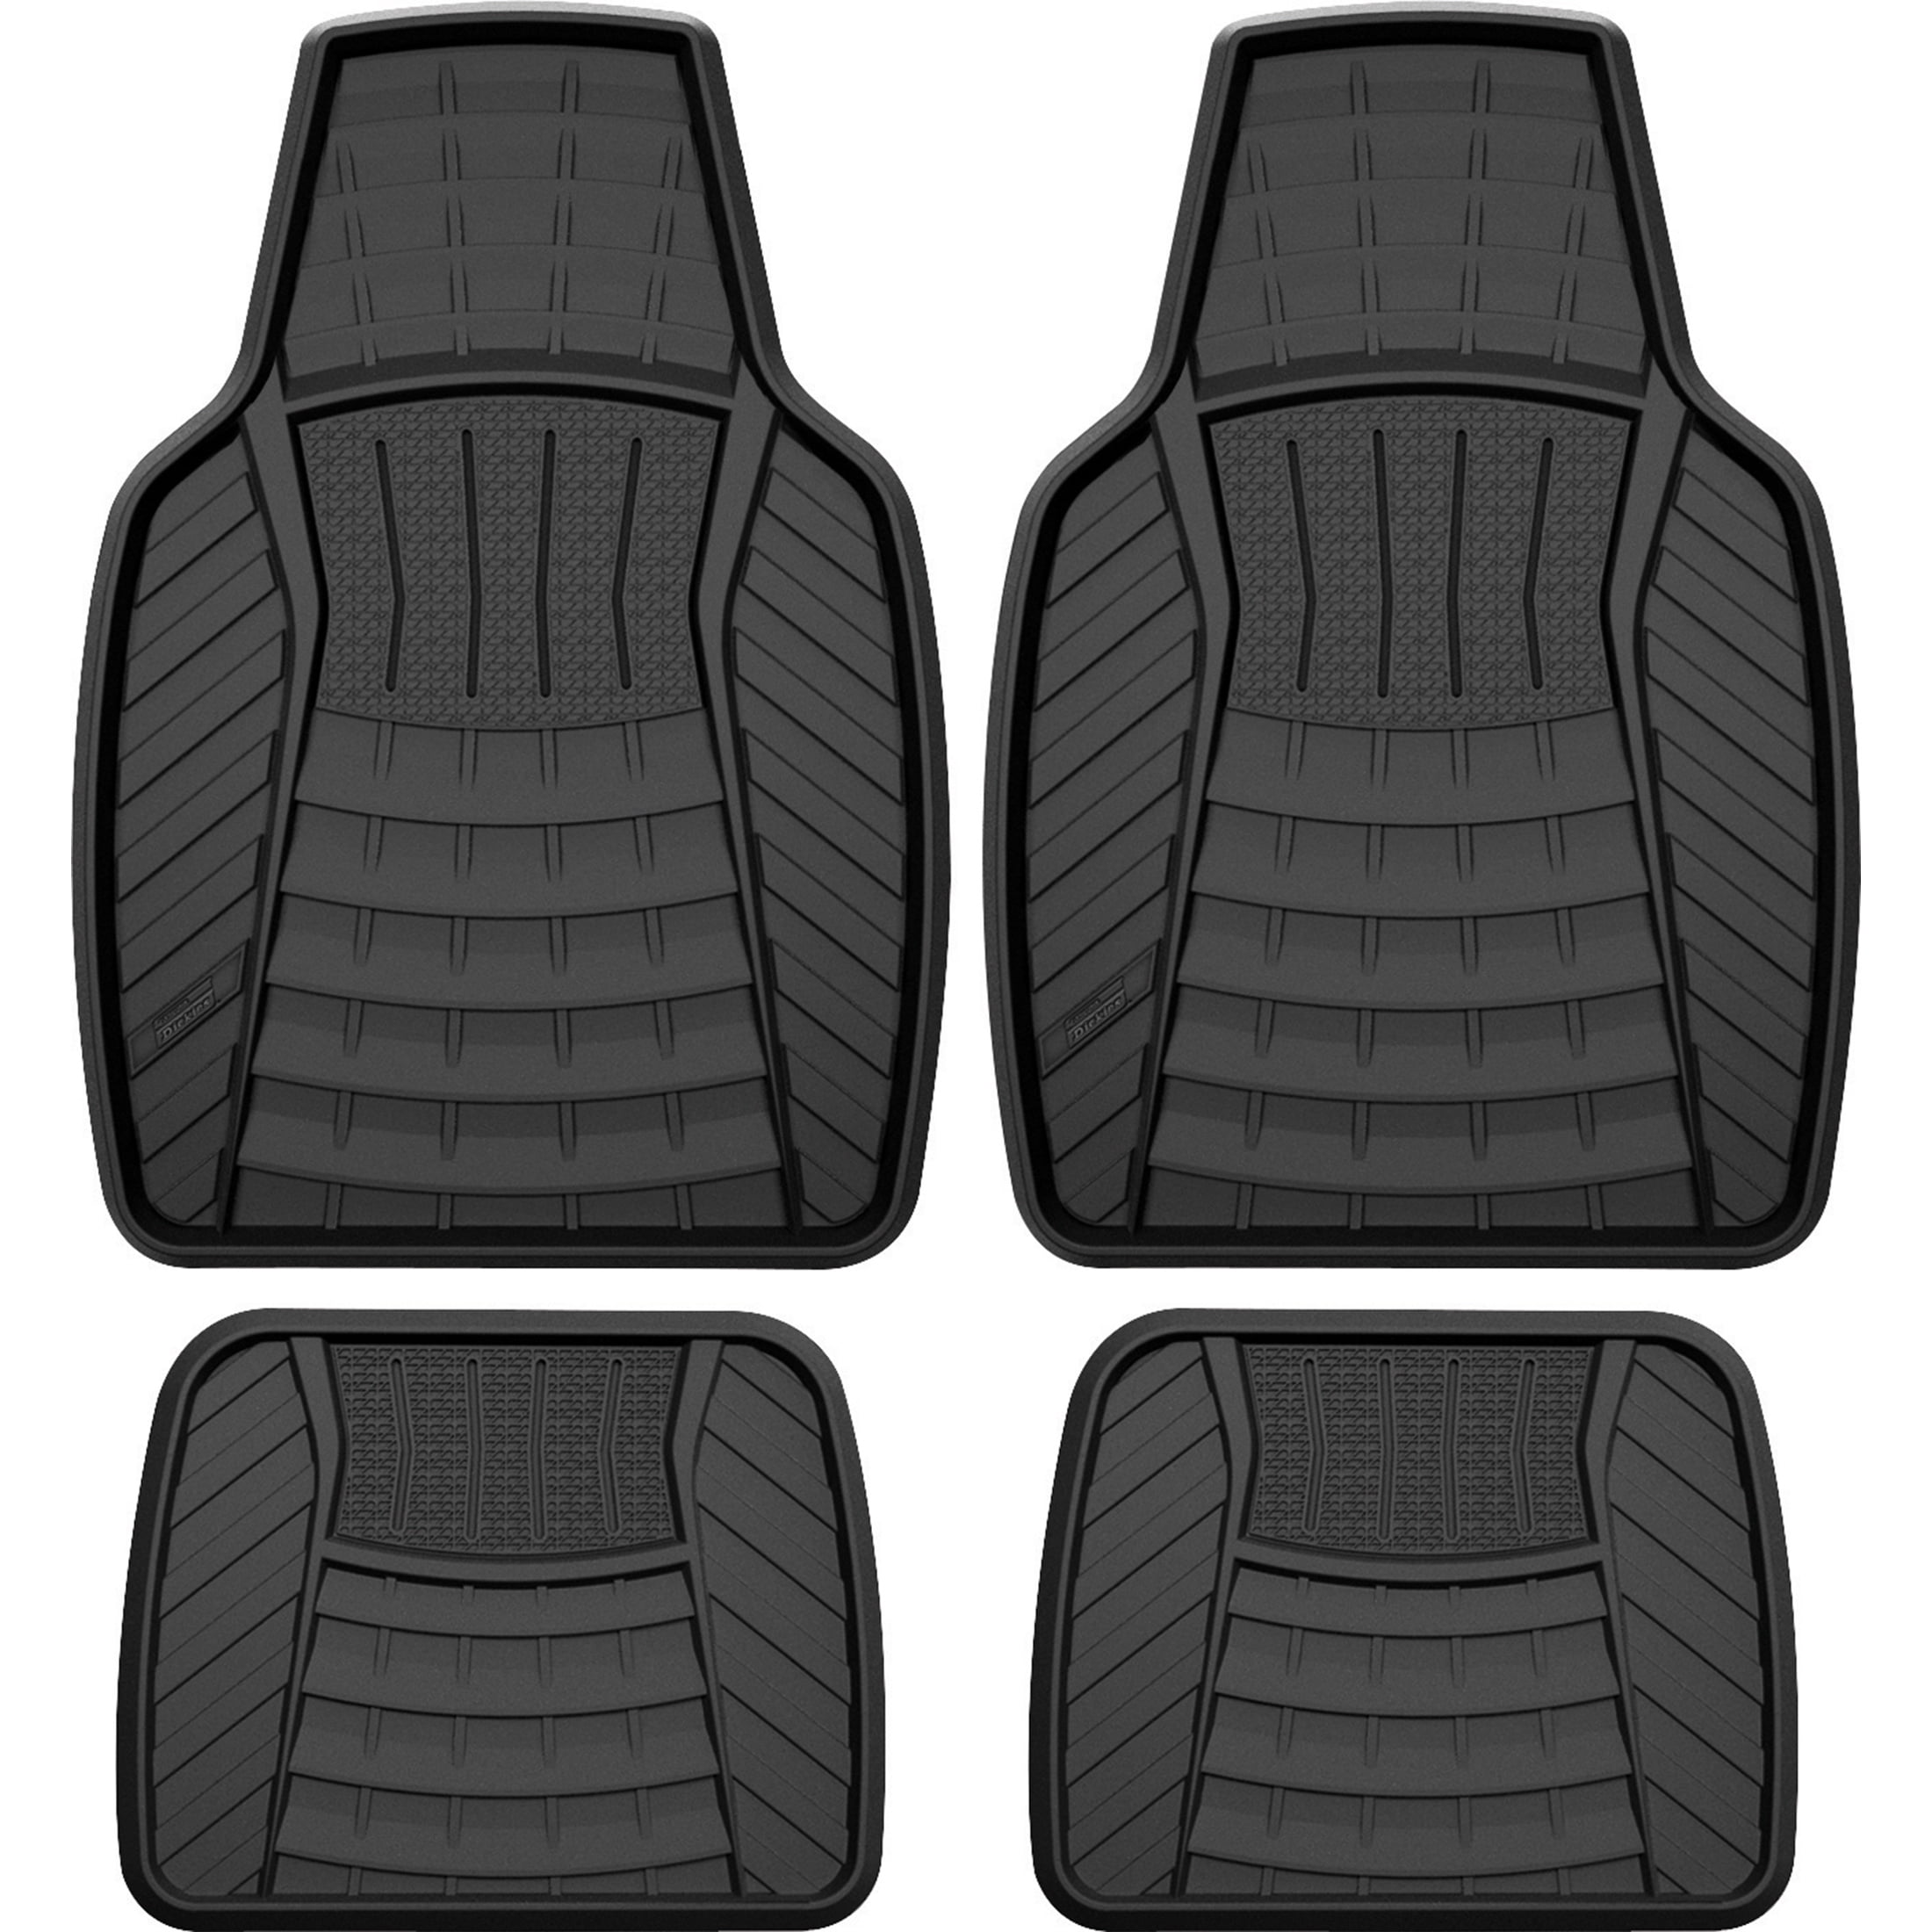 Need All-Weather Floor Mats for Your New SUV. Find the Best 2024 GMC Yukon XL Mats Here